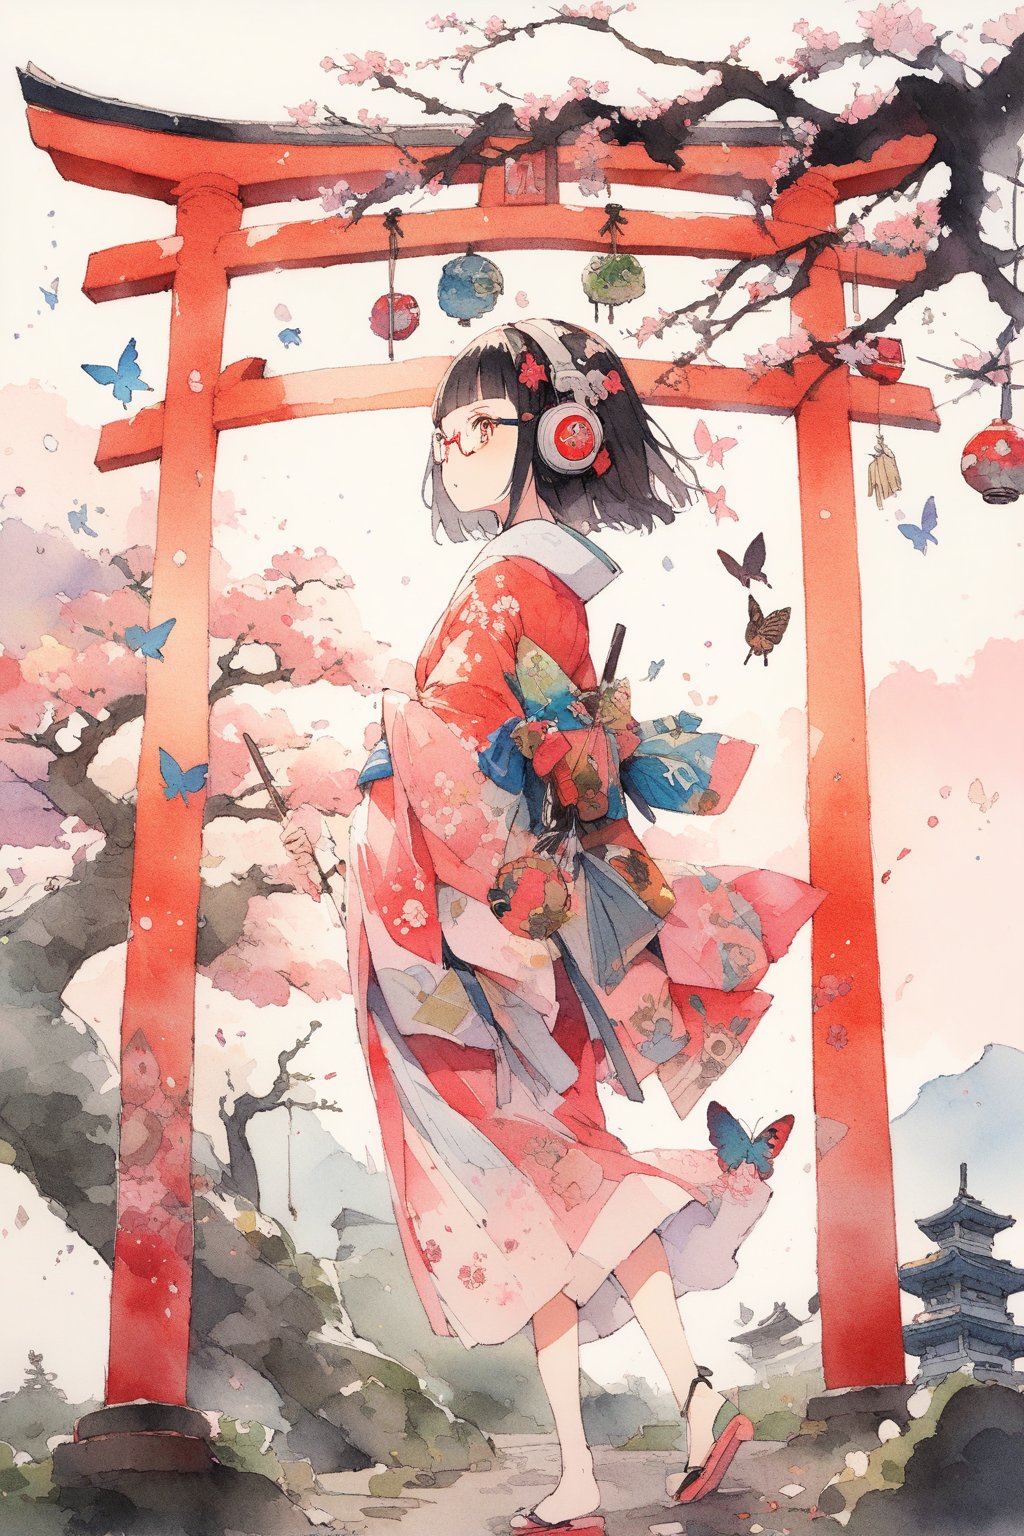 (extremely detailed fine touch:1.3),whimsical scene with bonsai, Japan, Torii, detailed girl looking back, (sexy kimono), walking in a strutting pose, with super very short hair, blunt bangs, (underrim glasses:1.3), headphones, butterflies, created using junk art elements, with repurposed materials, found objects, and a sense of resourcefulness and creativity, in watercolor, with a devastated landscape